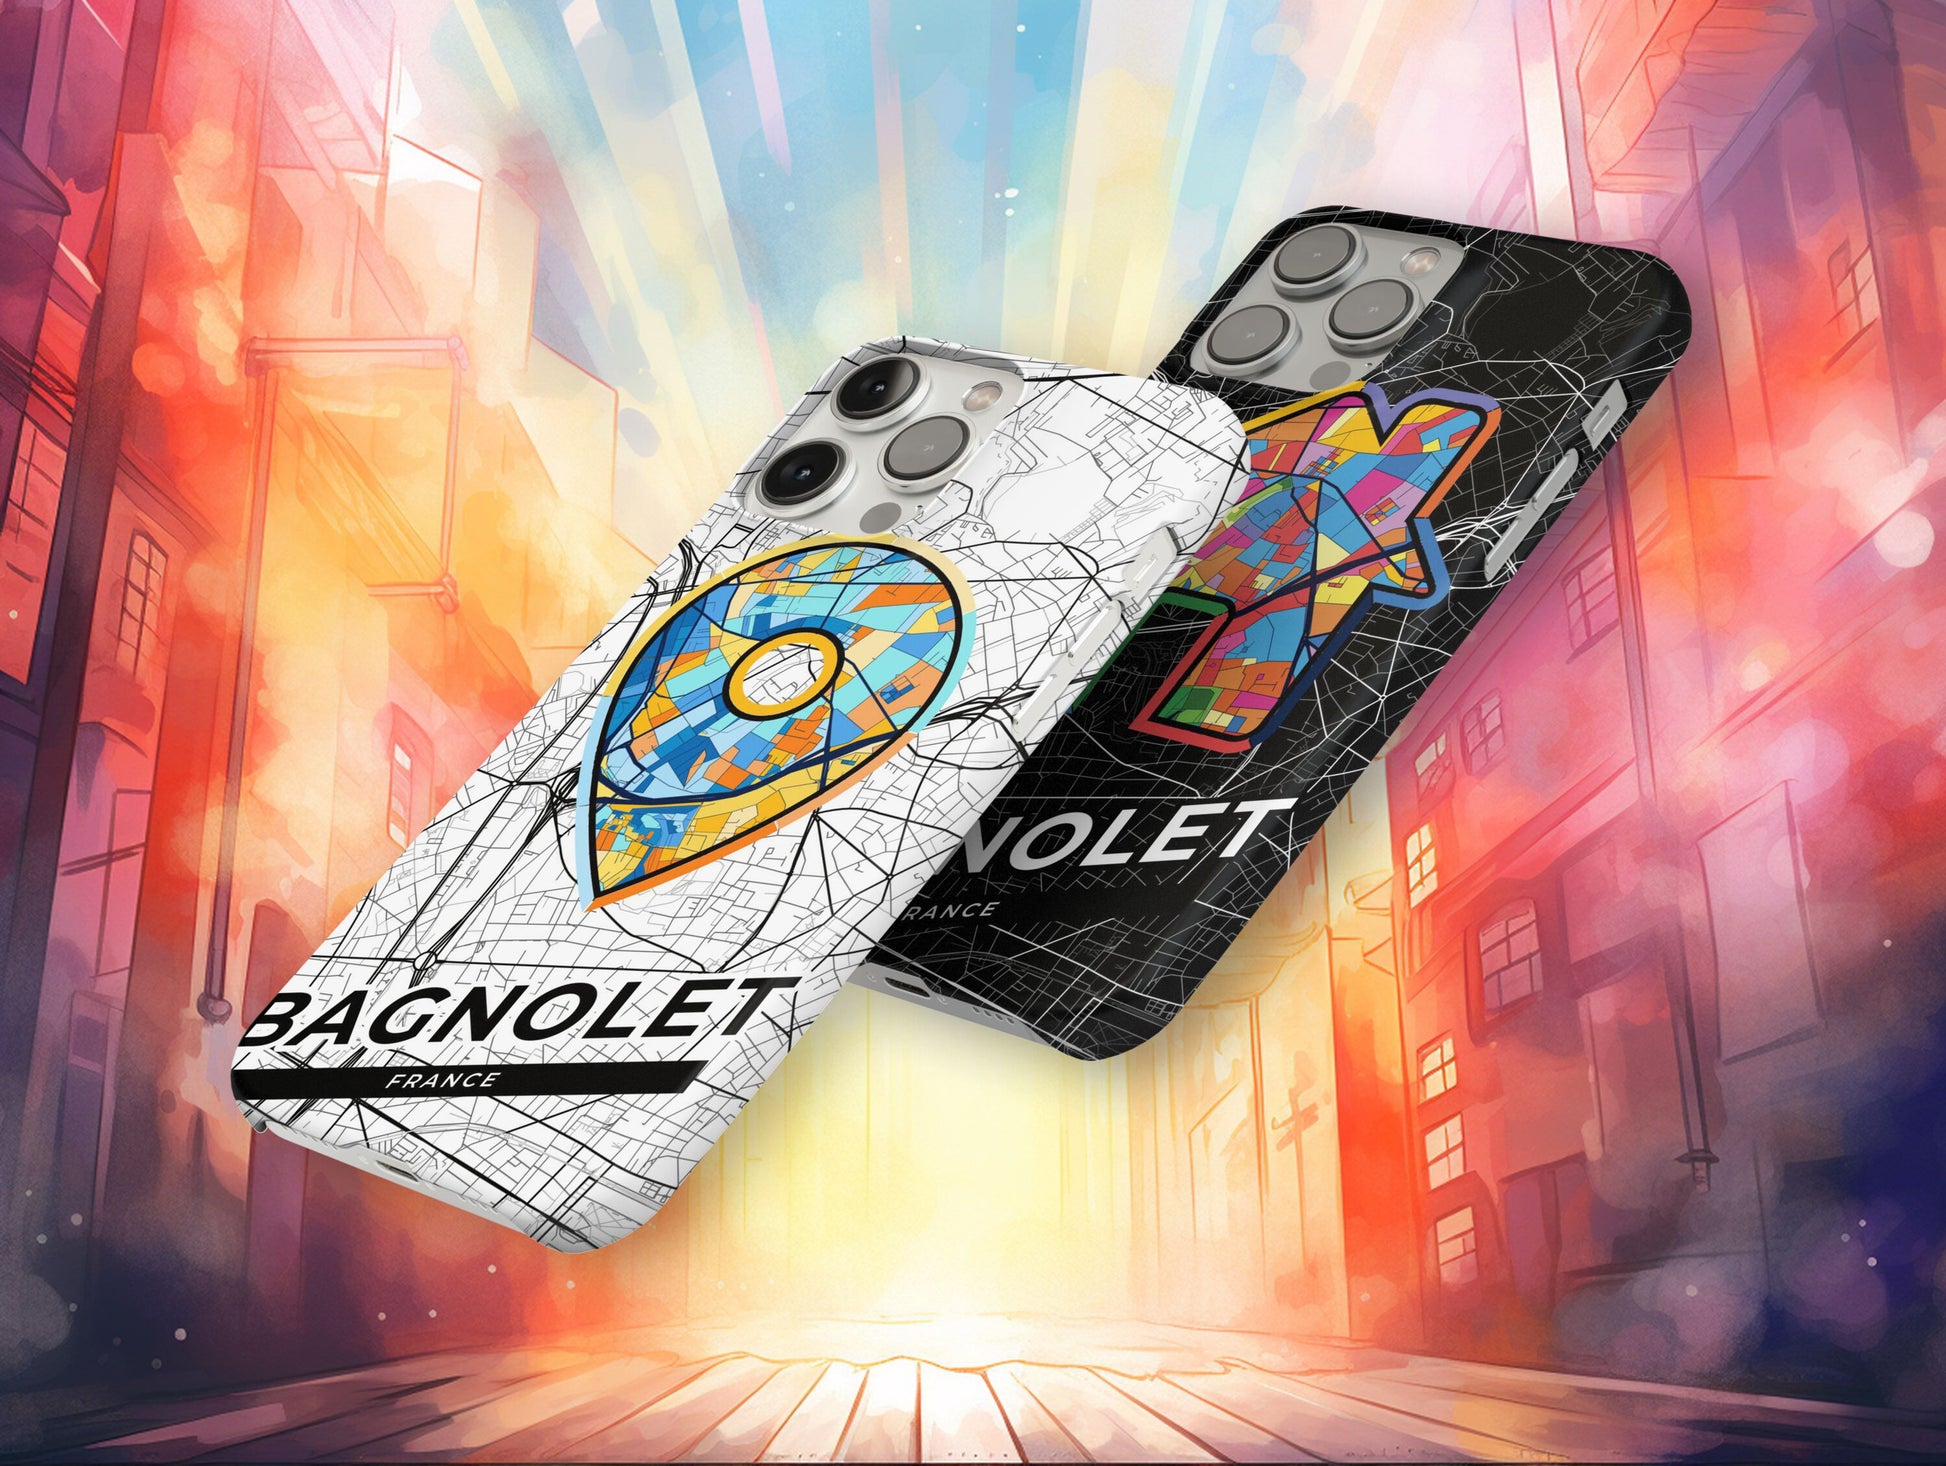 Bagnolet France slim phone case with colorful icon. Birthday, wedding or housewarming gift. Couple match cases.